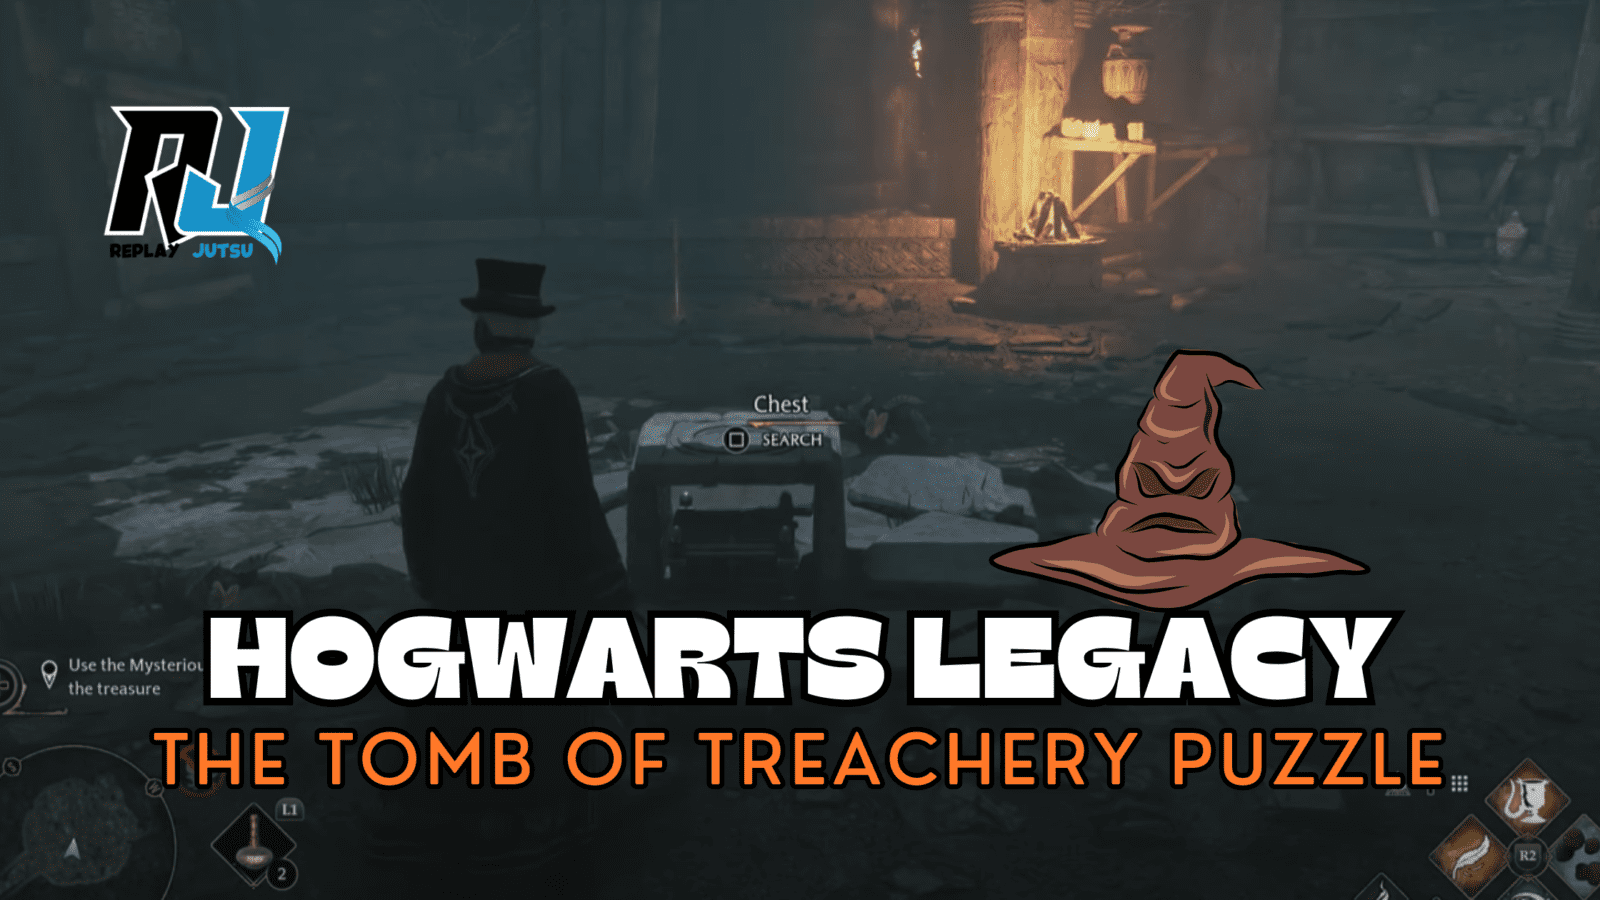 How To Solve The Tomb of Treachery Puzzle in Hogwarts Legacy